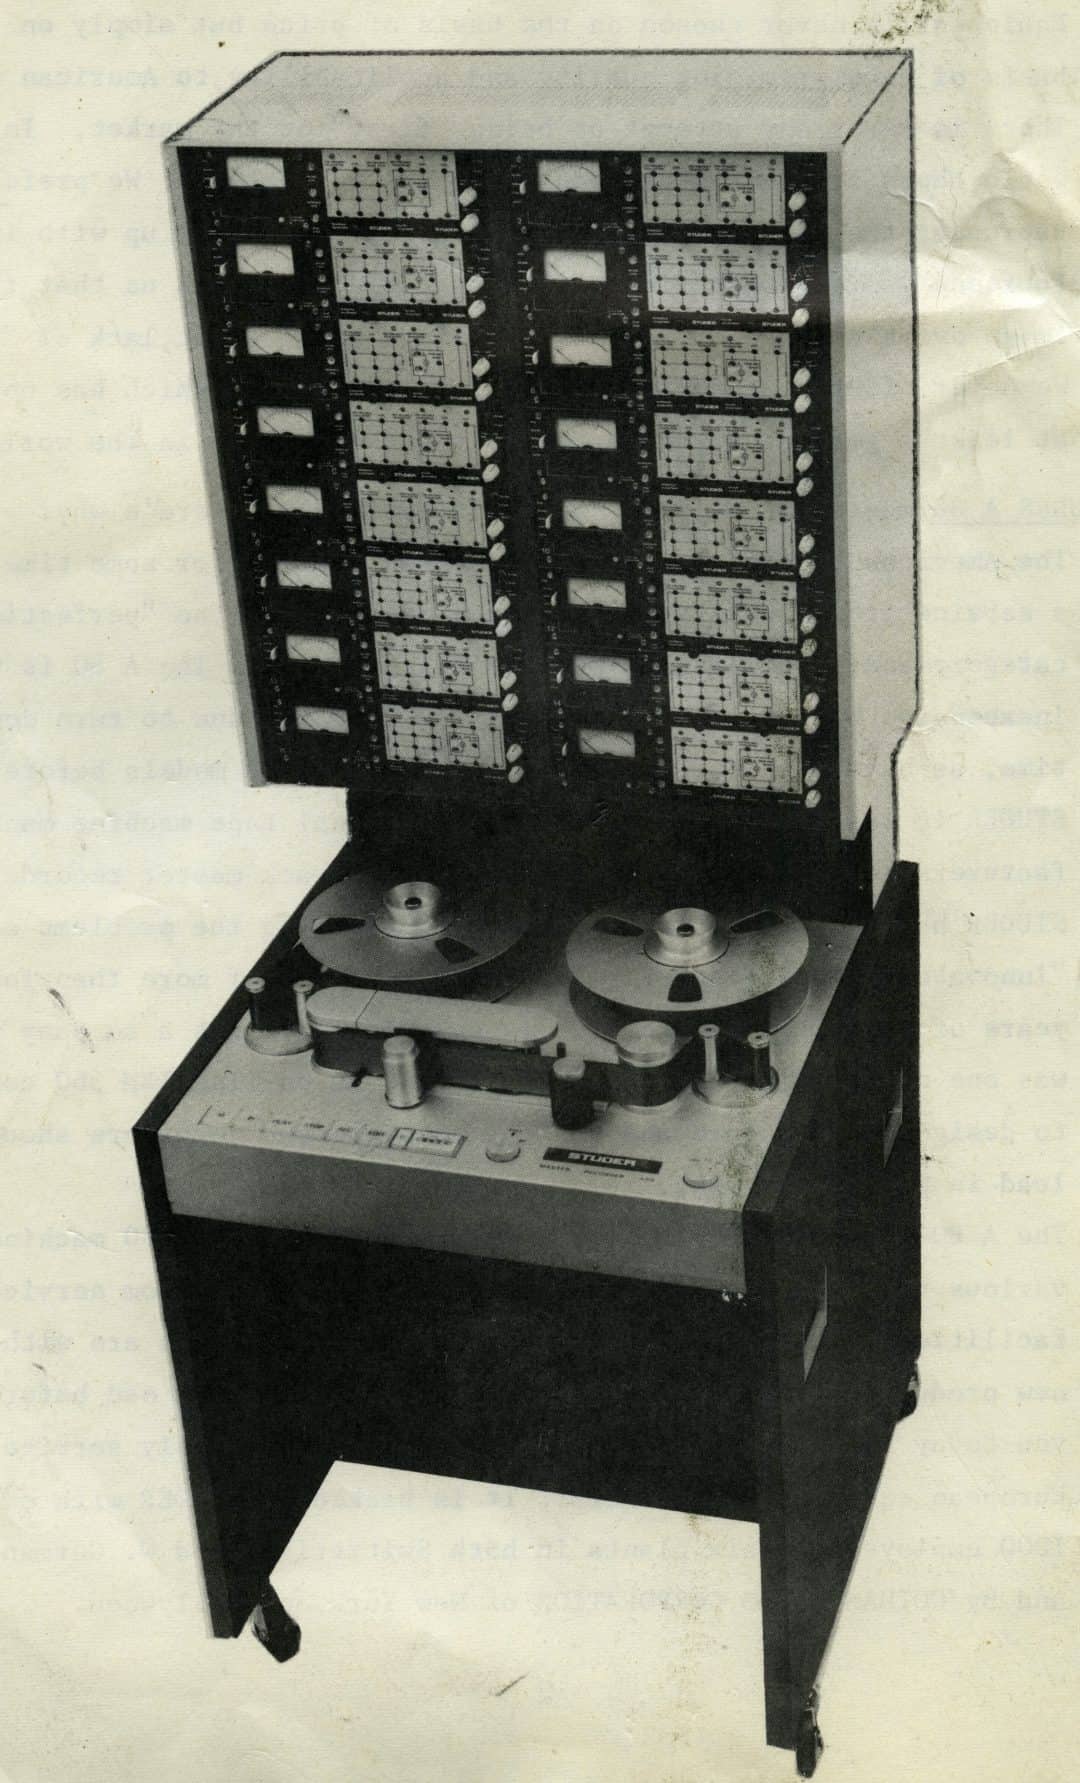 Studer A80 Tape Recorder